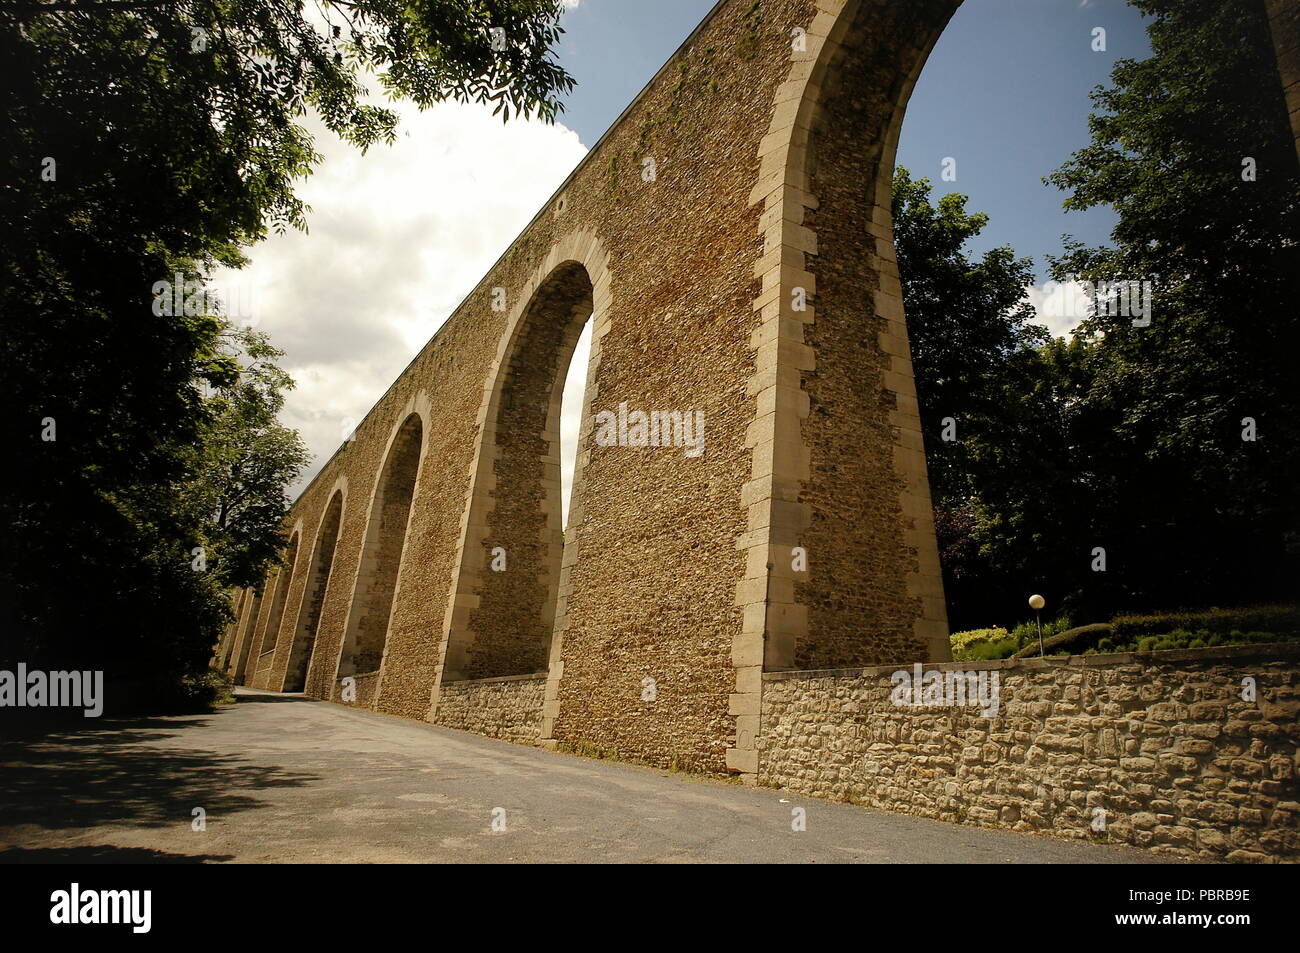 AJAXNETPHOTO. LOUVECIENNES, FRANCE. - MACHINE DE MARLY - THE AQUADUCT OF LOUVECIENNES SITUATED TO THE WEST OF PARIS. BUILT IN 1681-85 BY JULES HARDOUIN-MANSARD AND ROBERT DE COTTE. CEASED TO BE USED IN 1866 WHEN IT WAS REPLACED BY PIPES.  PHOTO:JONATHAN EASTLAND/AJAX REF;RD1_120906_23501_1 Stock Photo